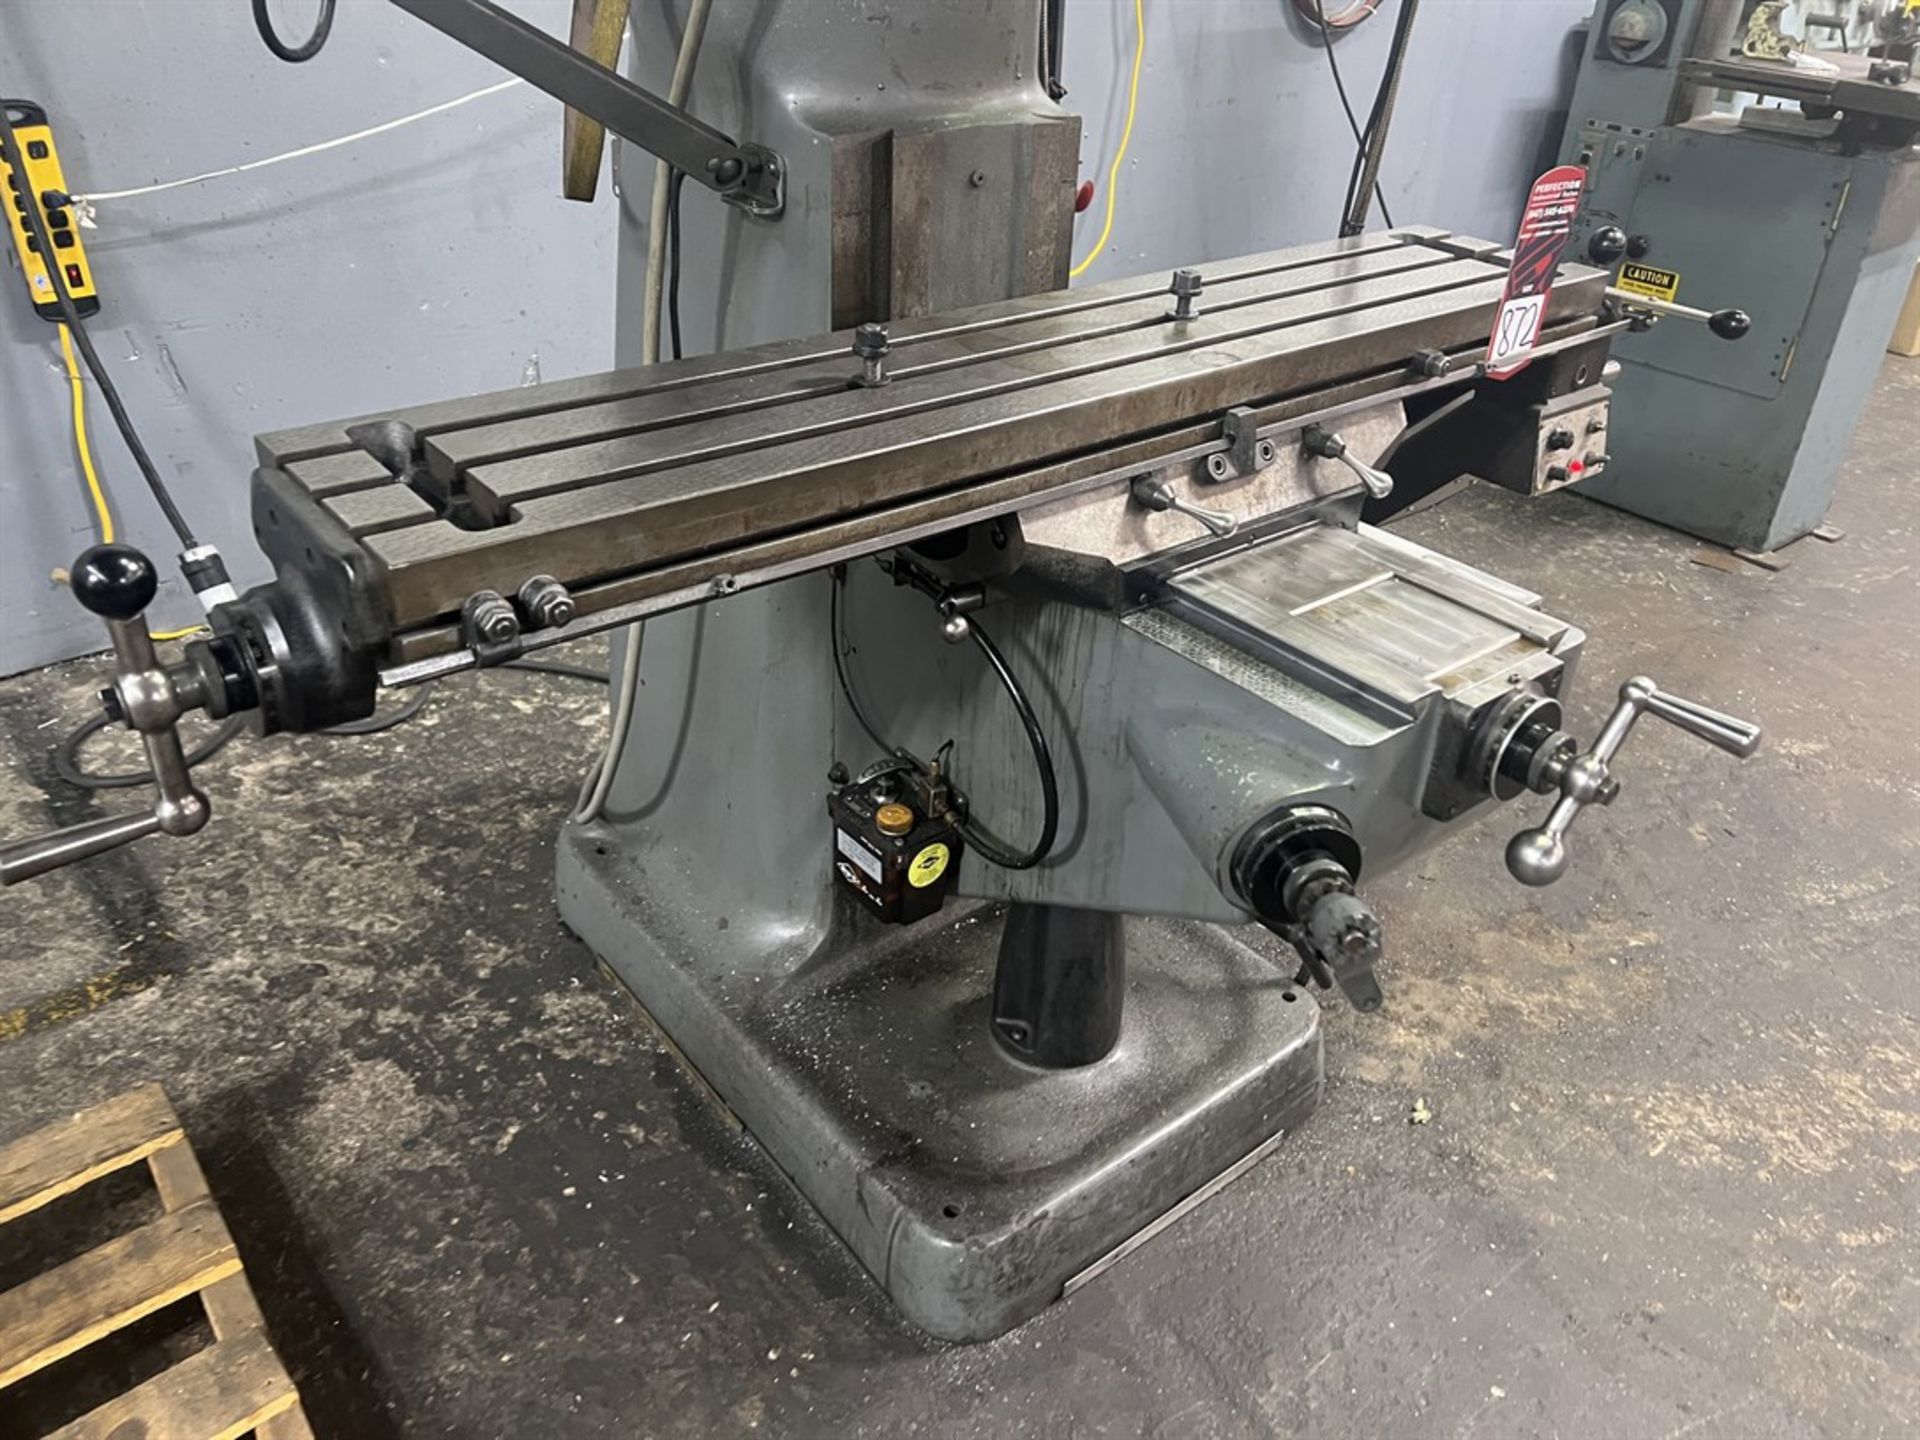 BRIDGEPORT Milling Machine, s/n HDNG1770, 9” x 48” Power Feed Table, 2 HP, Acu-Rite DRO - Image 3 of 6